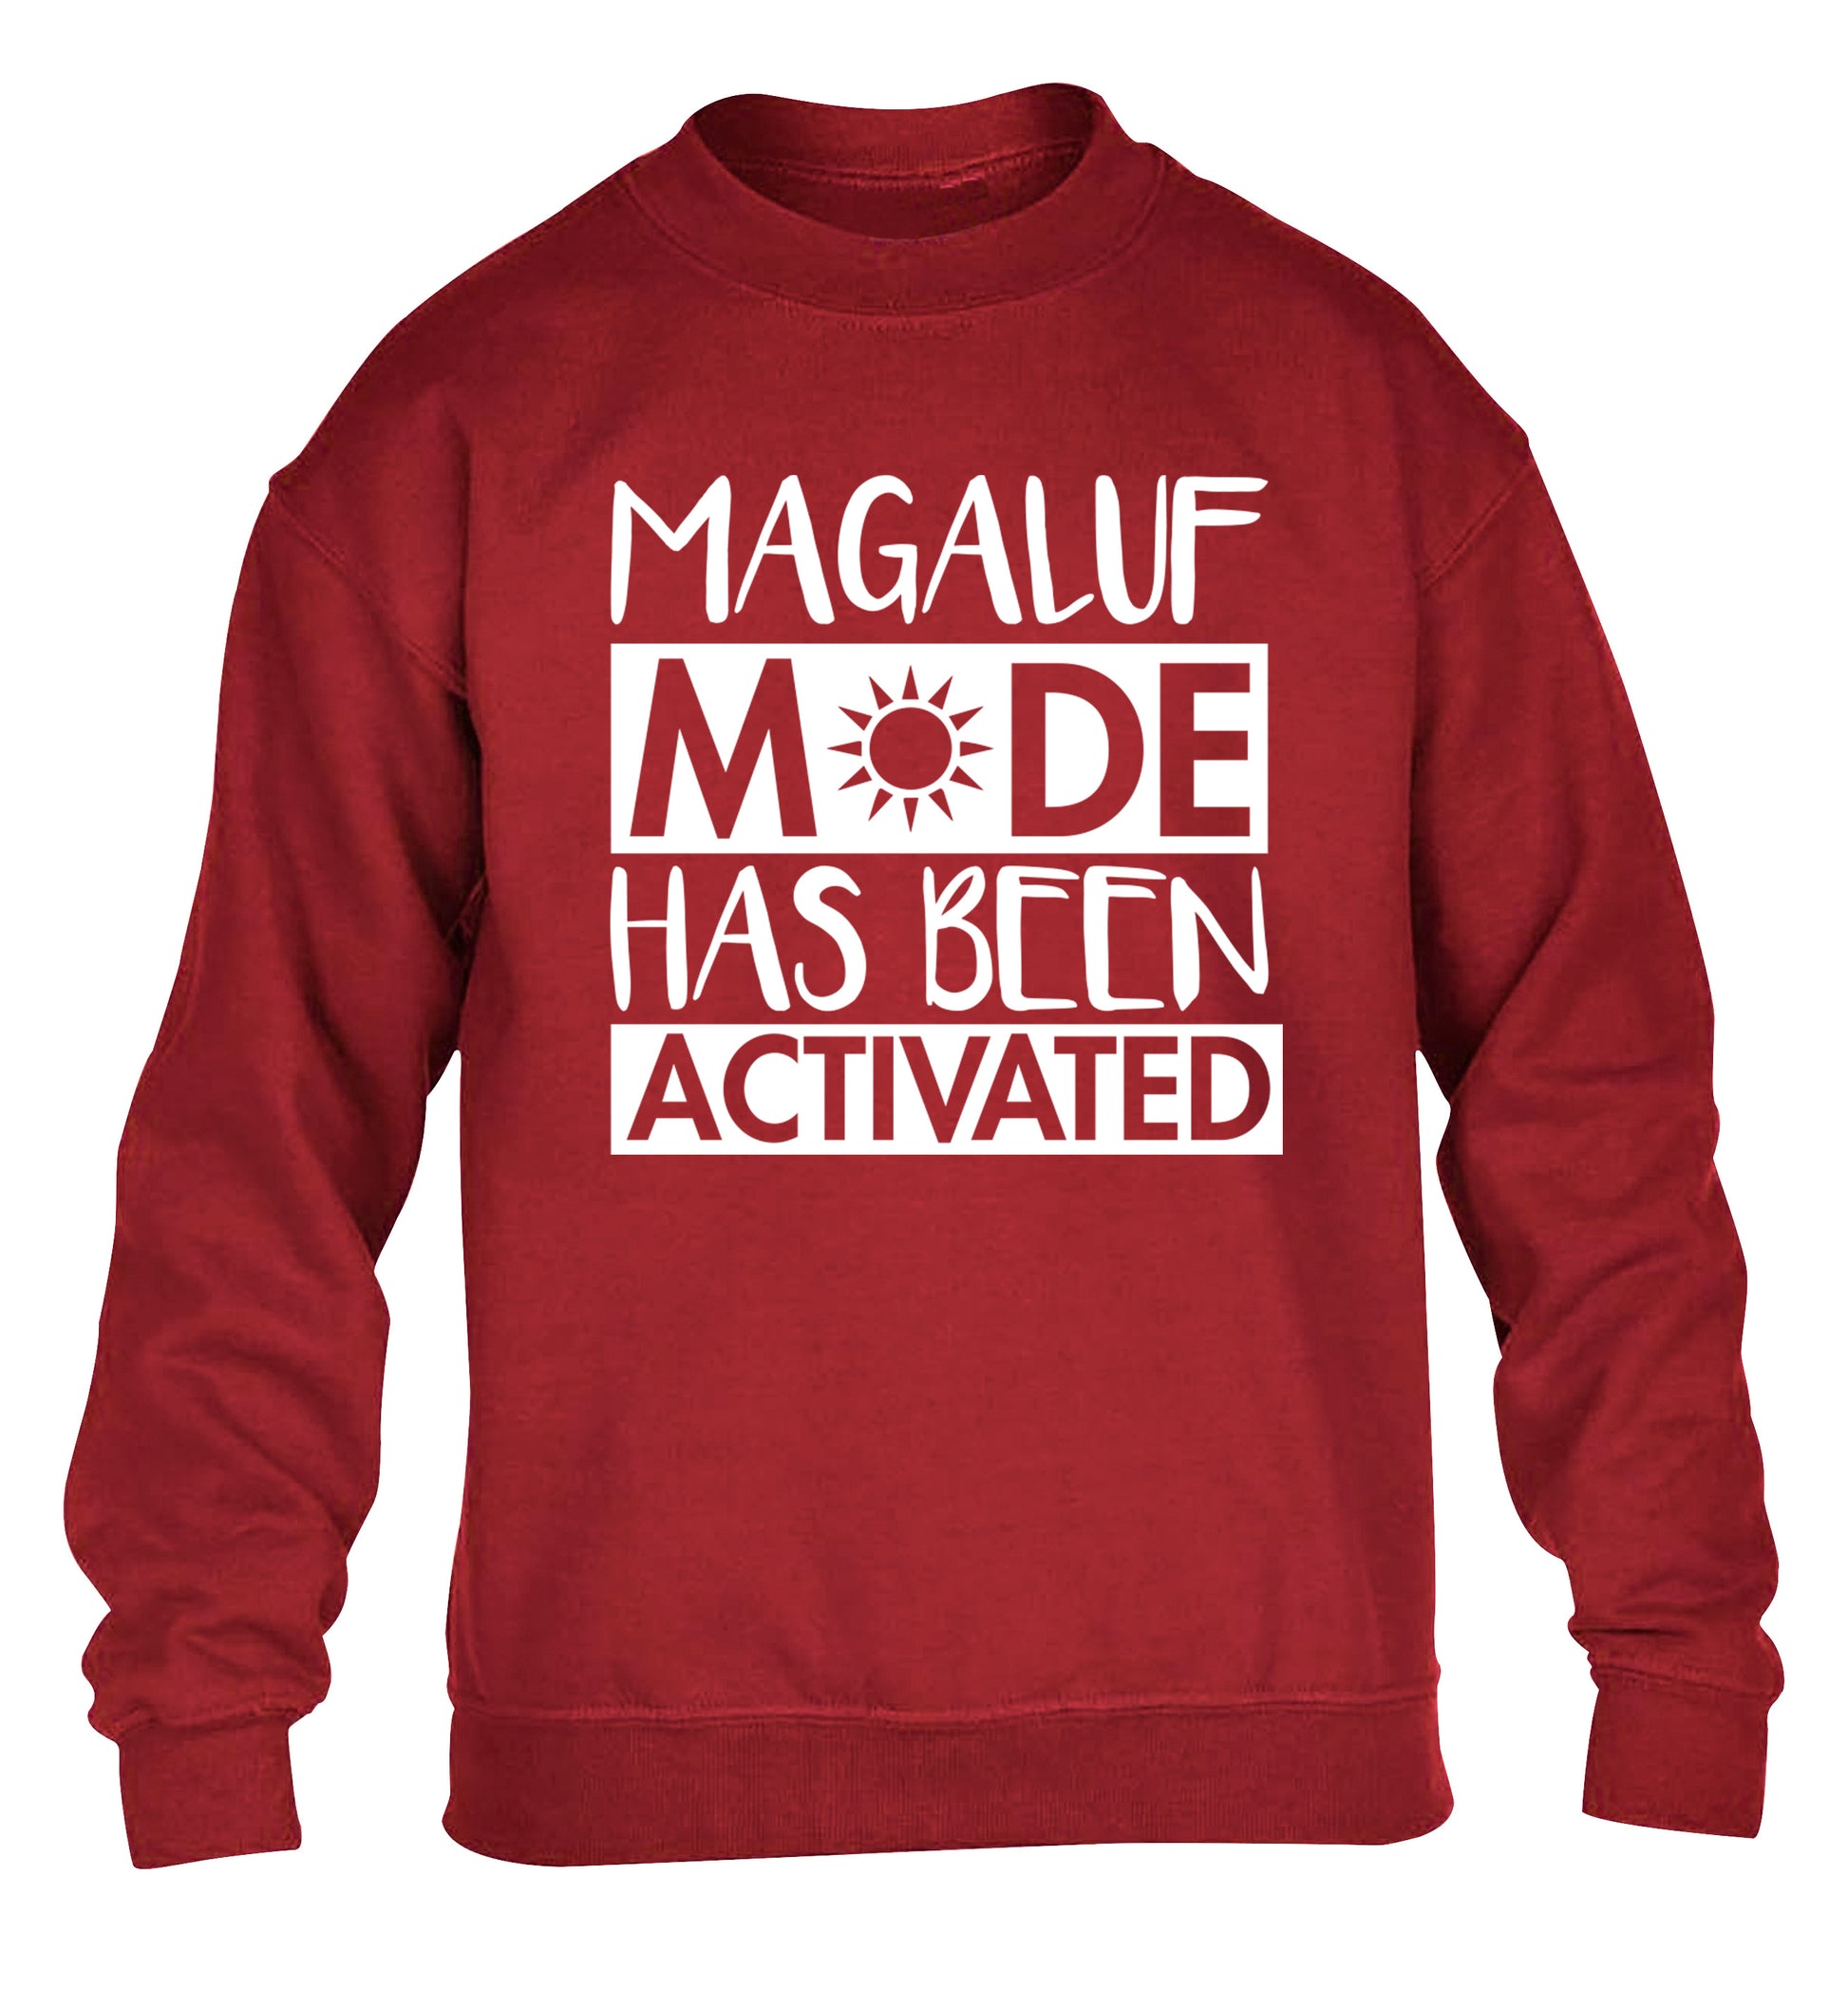 Magaluf mode has been activated children's grey sweater 12-13 Years